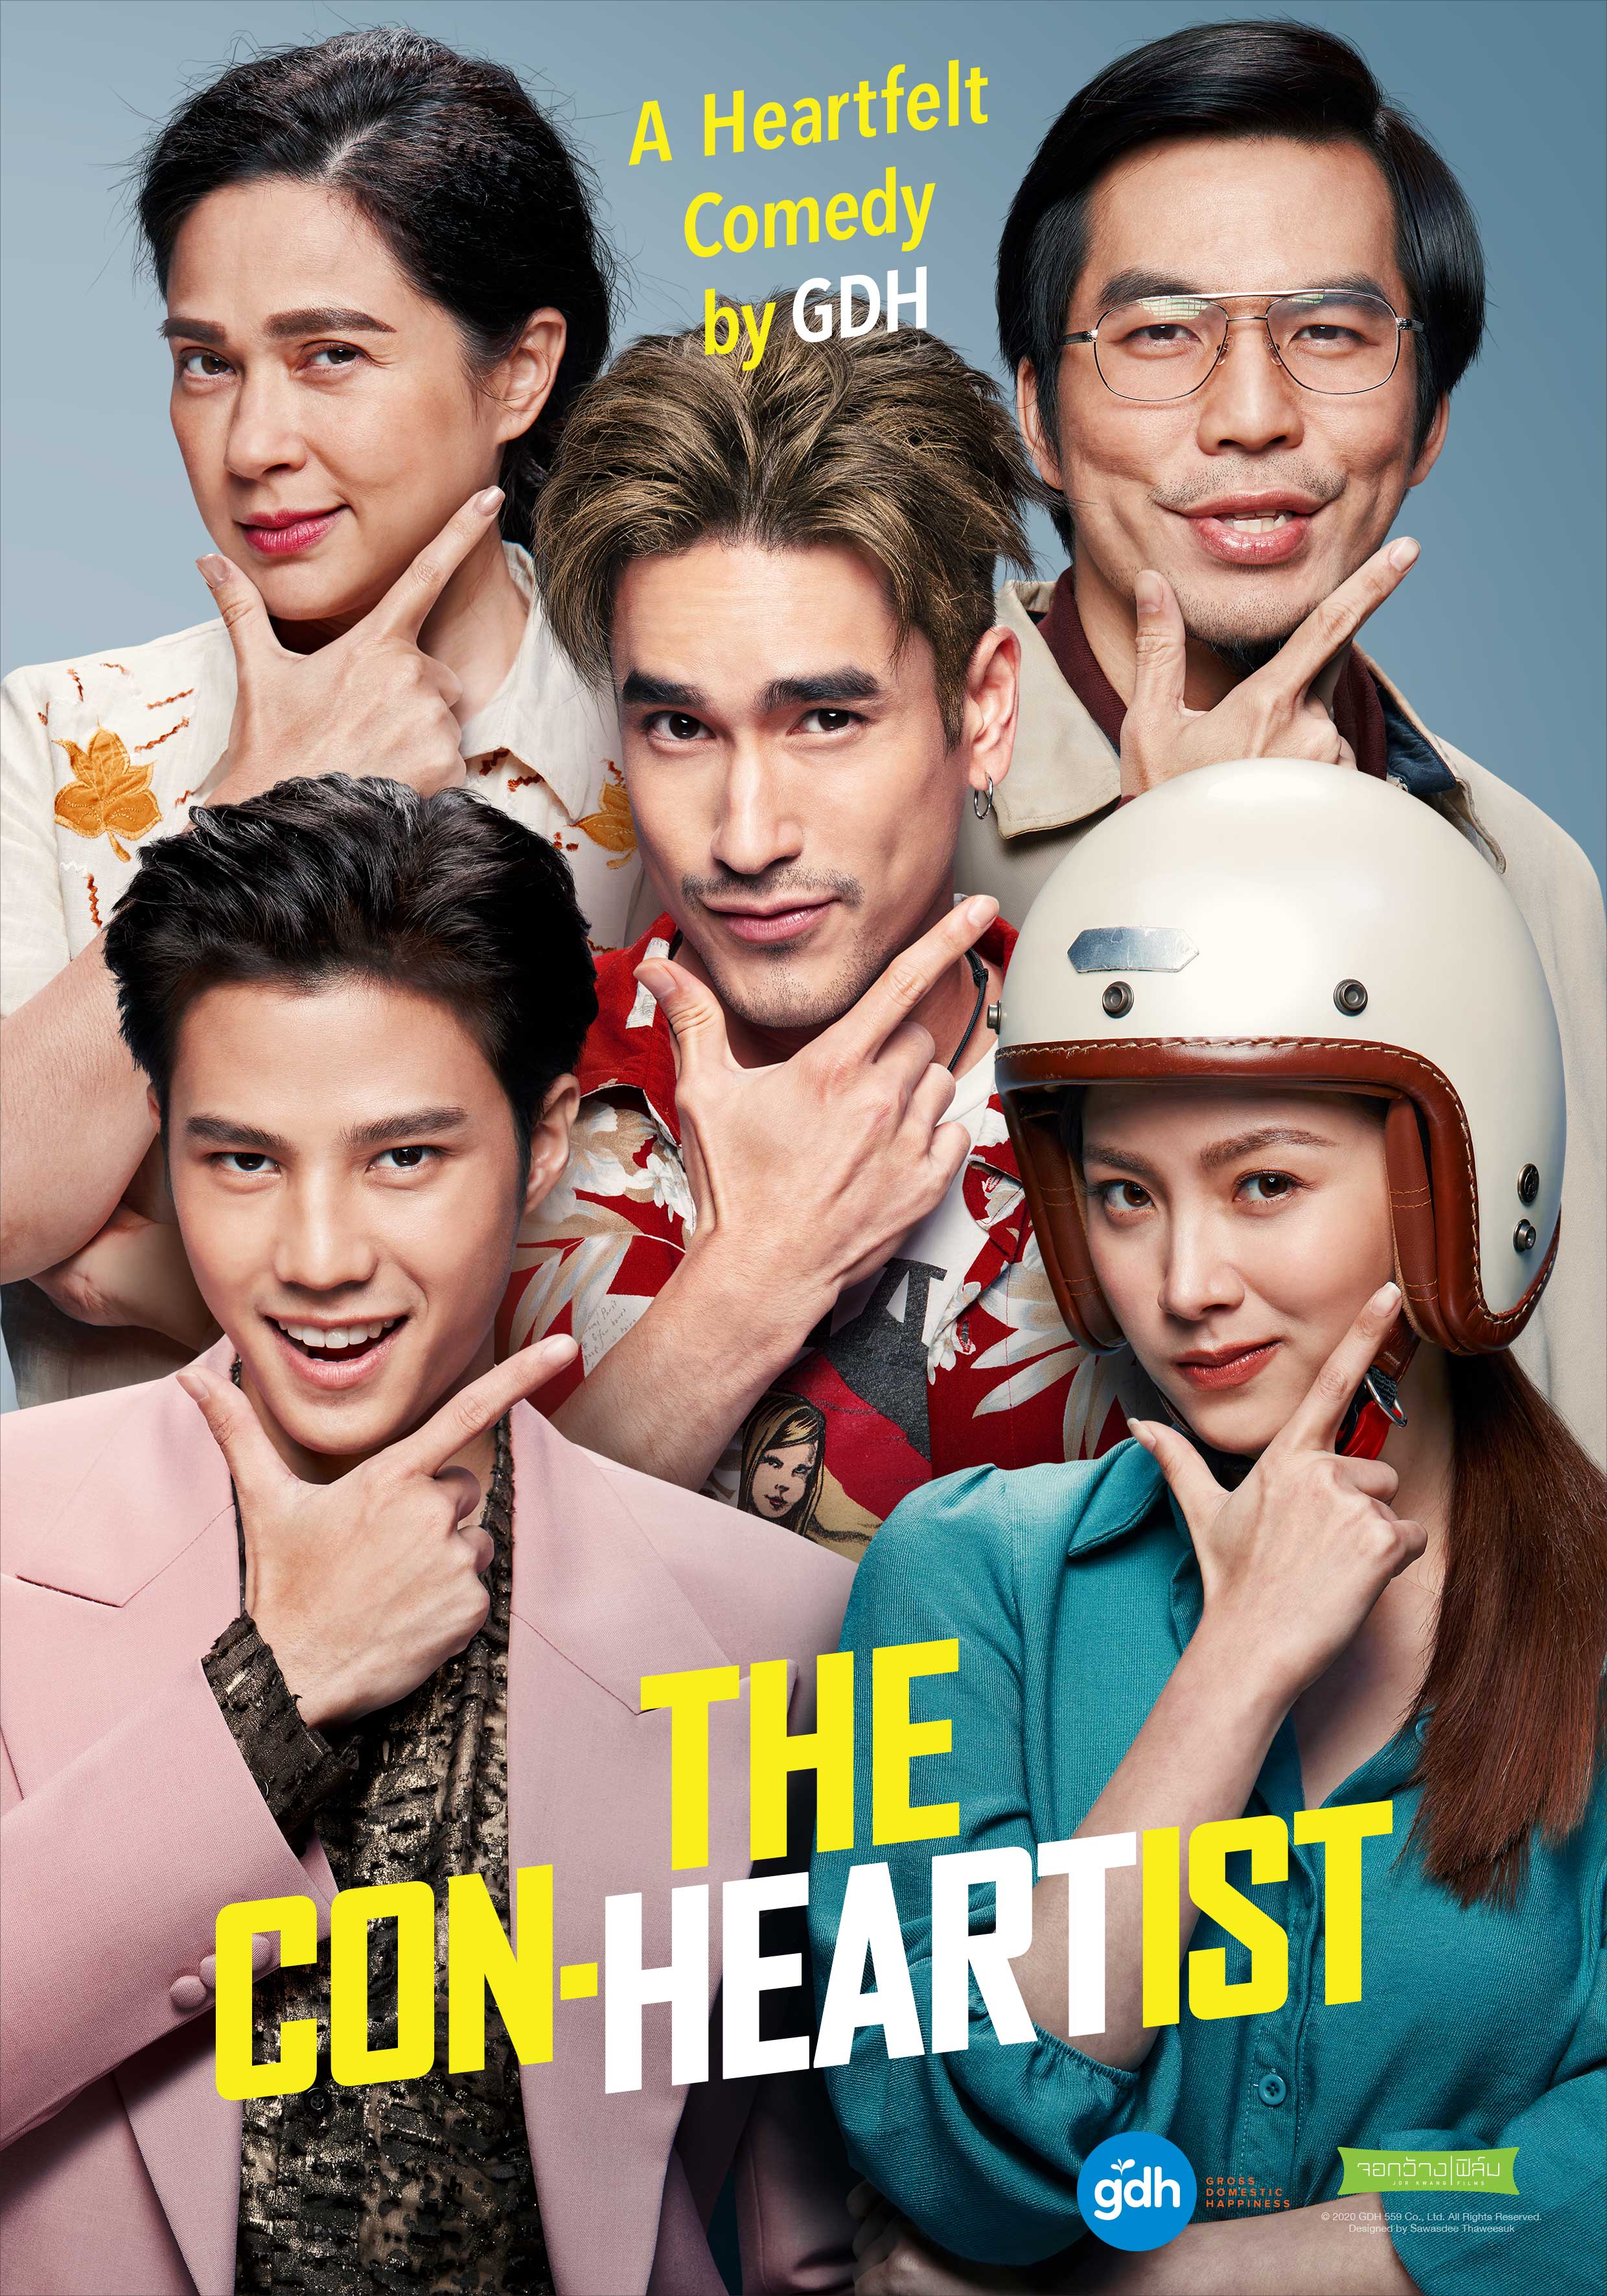 anh vinh recommends thailand comedy movies 2015 pic